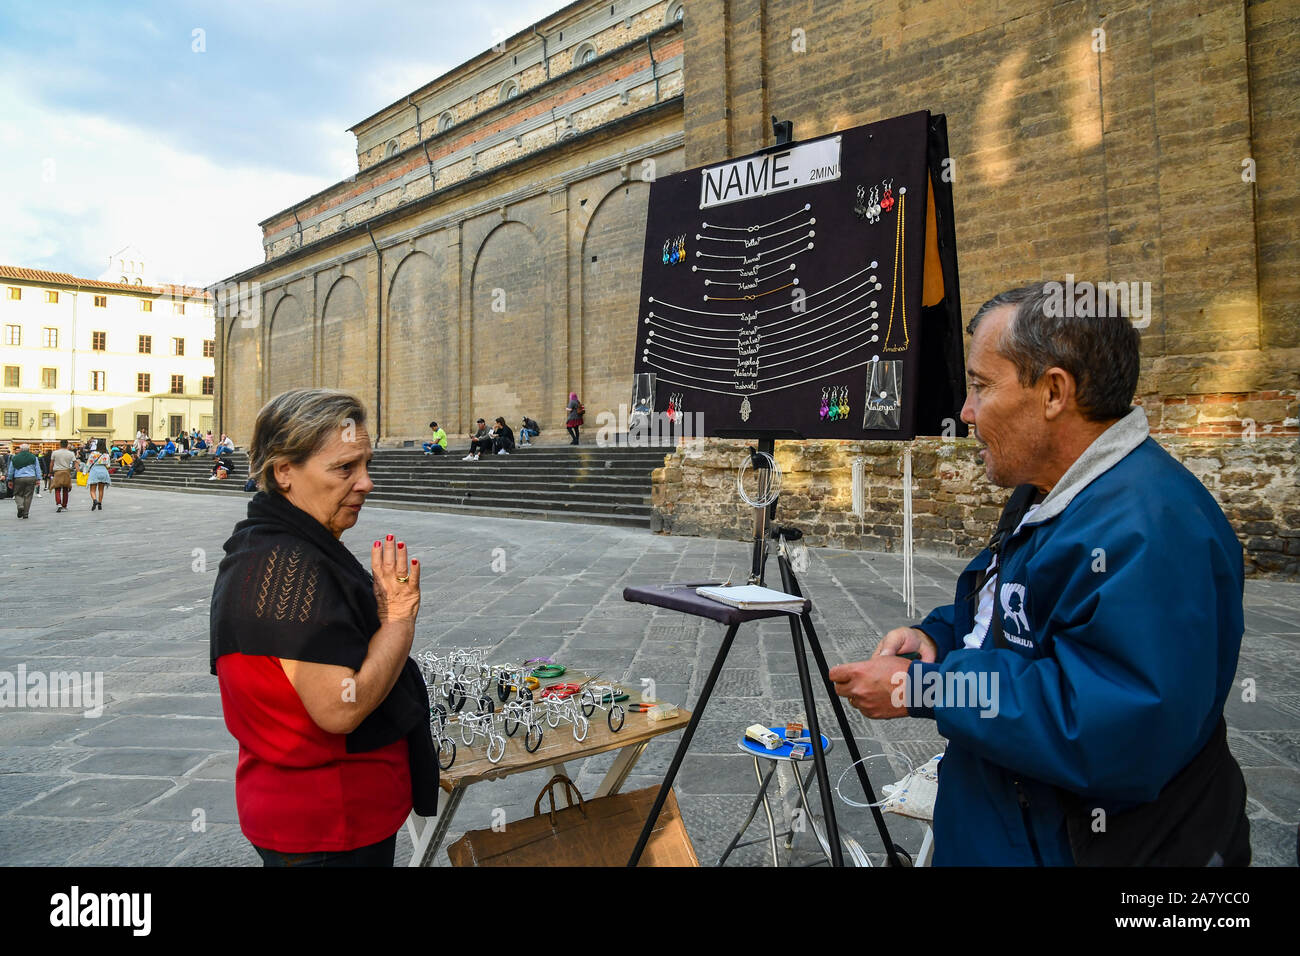 A lady bargaining the price of a necklace with a peddler in front of the Basilica of San Lorenzo in the city center of Florence, Tuscany, Italy Stock Photo